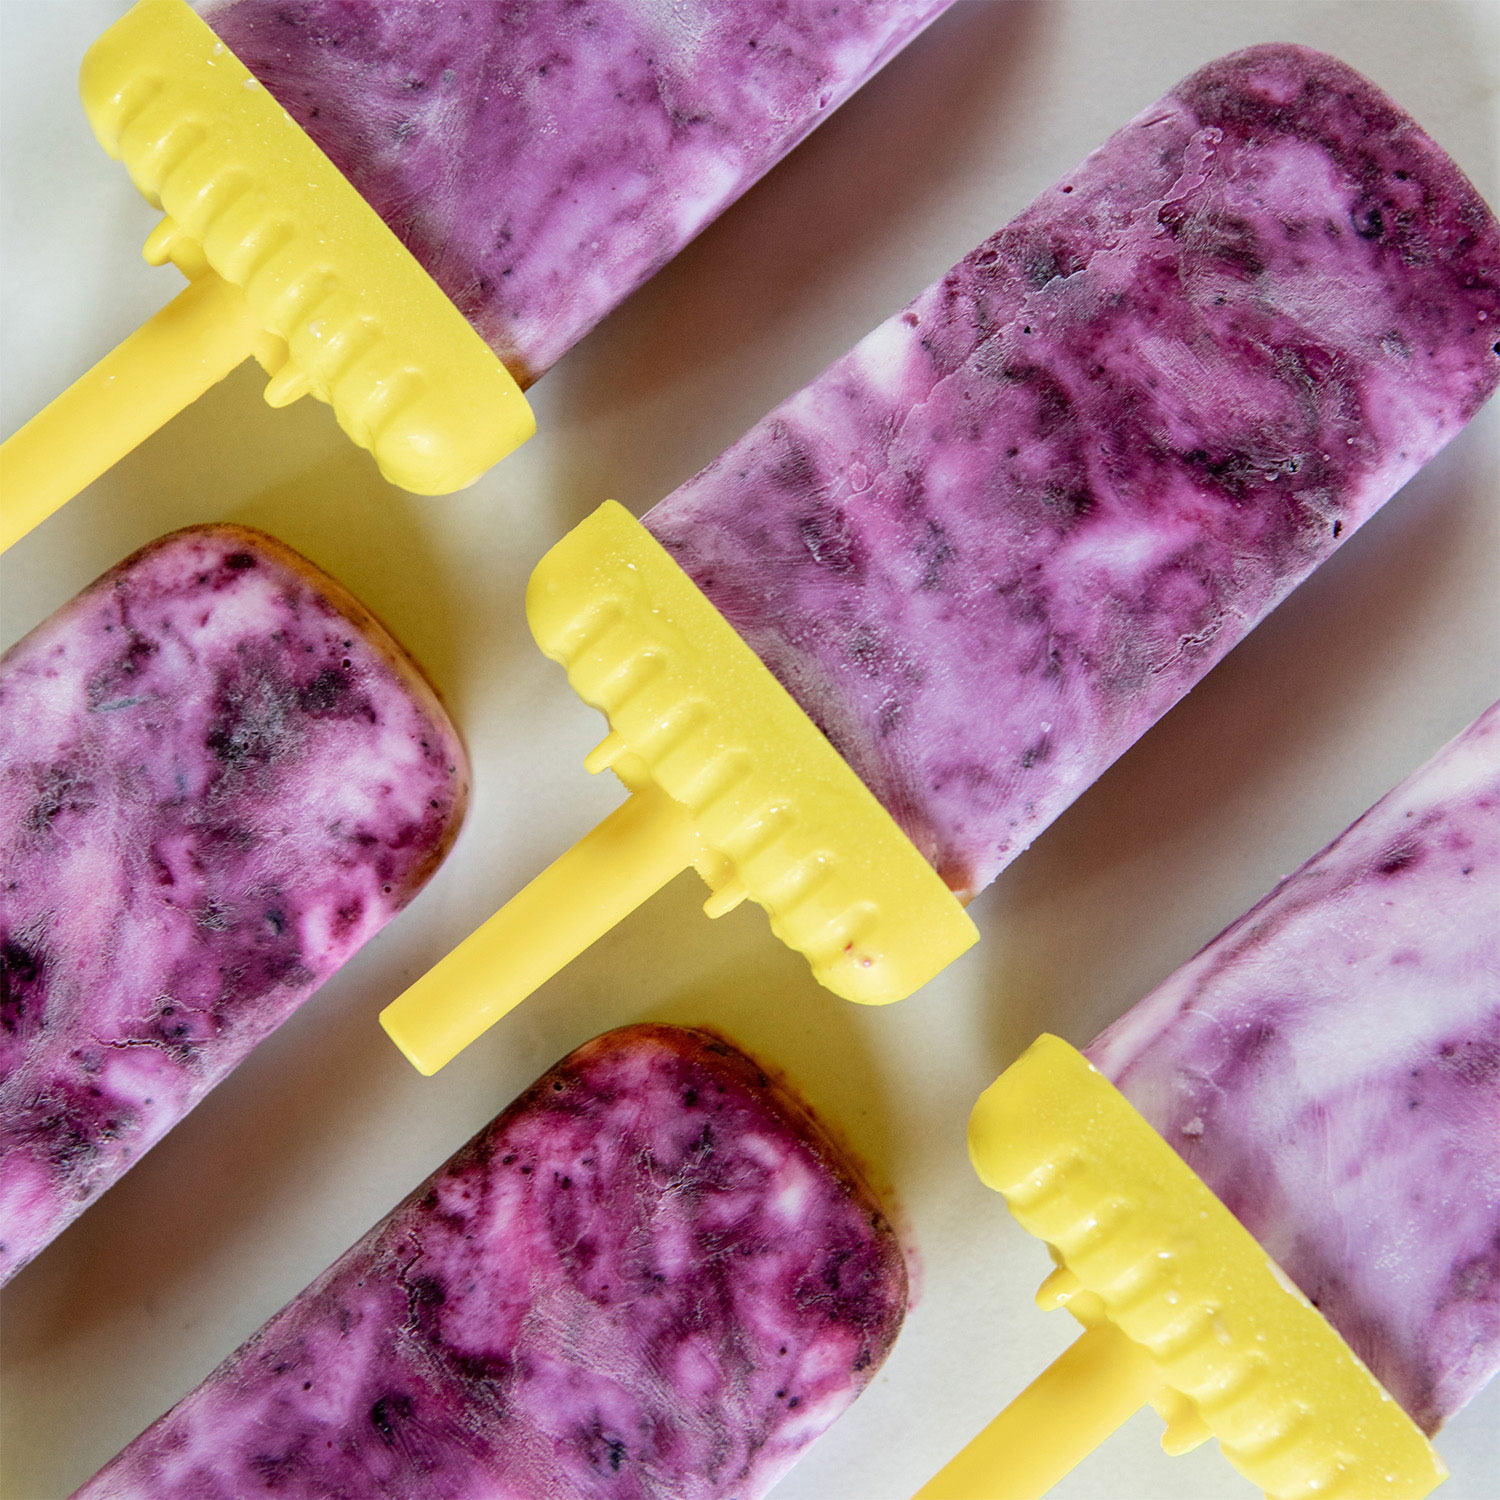 Wild Blueberry Creamsicle Pops